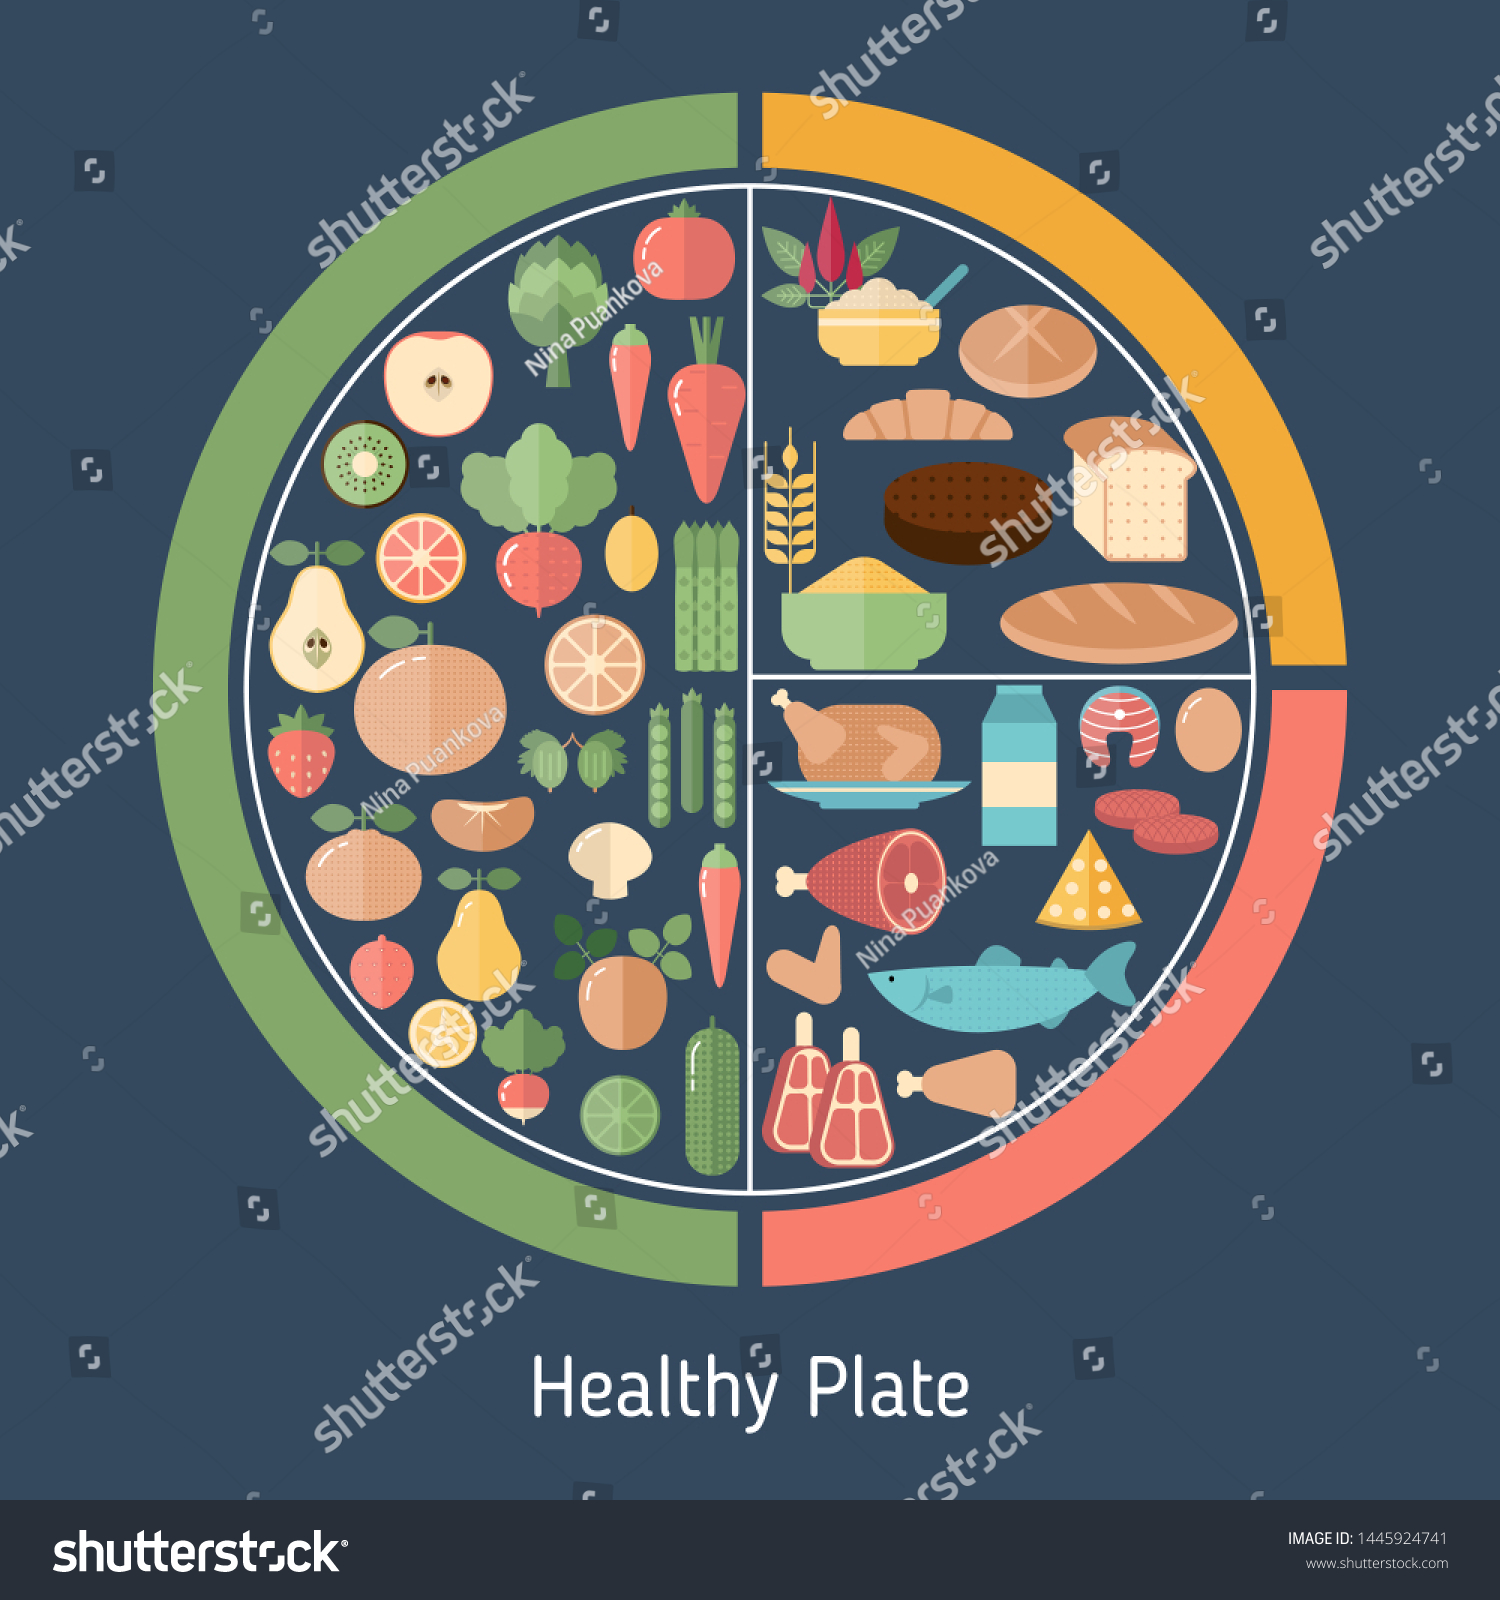 Foods Infographics Healthy Eating Plate Infographic Vector Có Sẵn Miễn Phí Bản Quyền 1445924741 6091